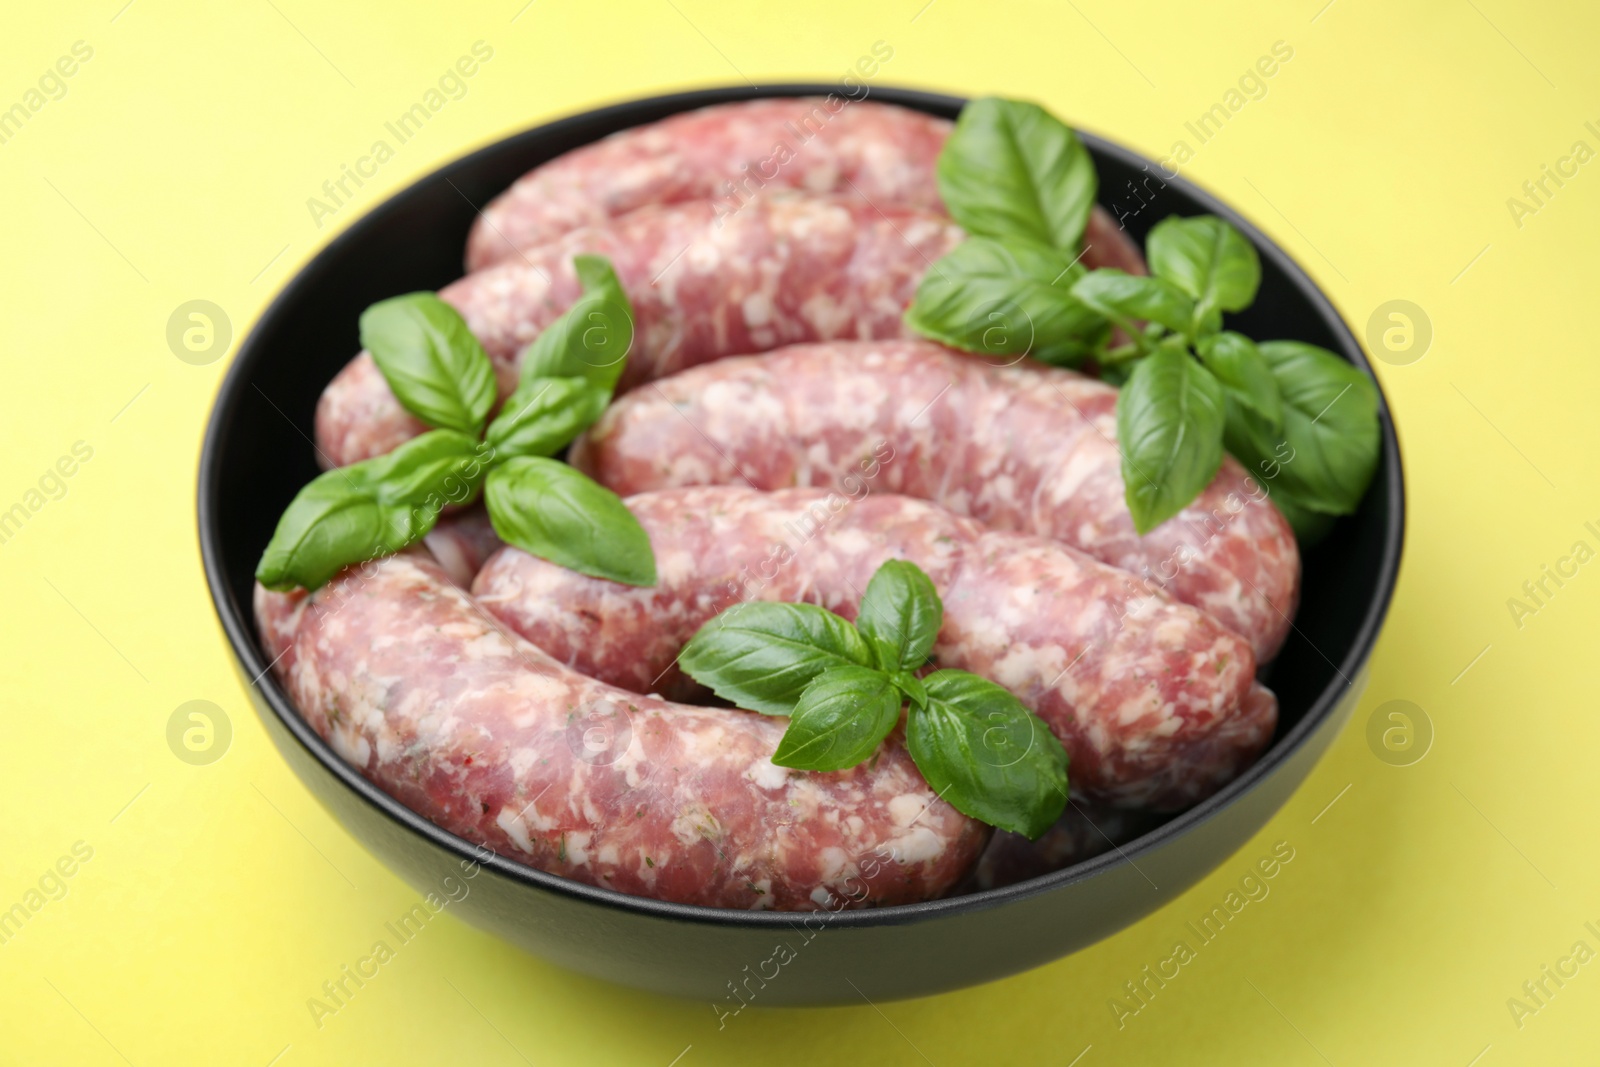 Photo of Raw homemade sausages and basil leaves in bowl on yellow background